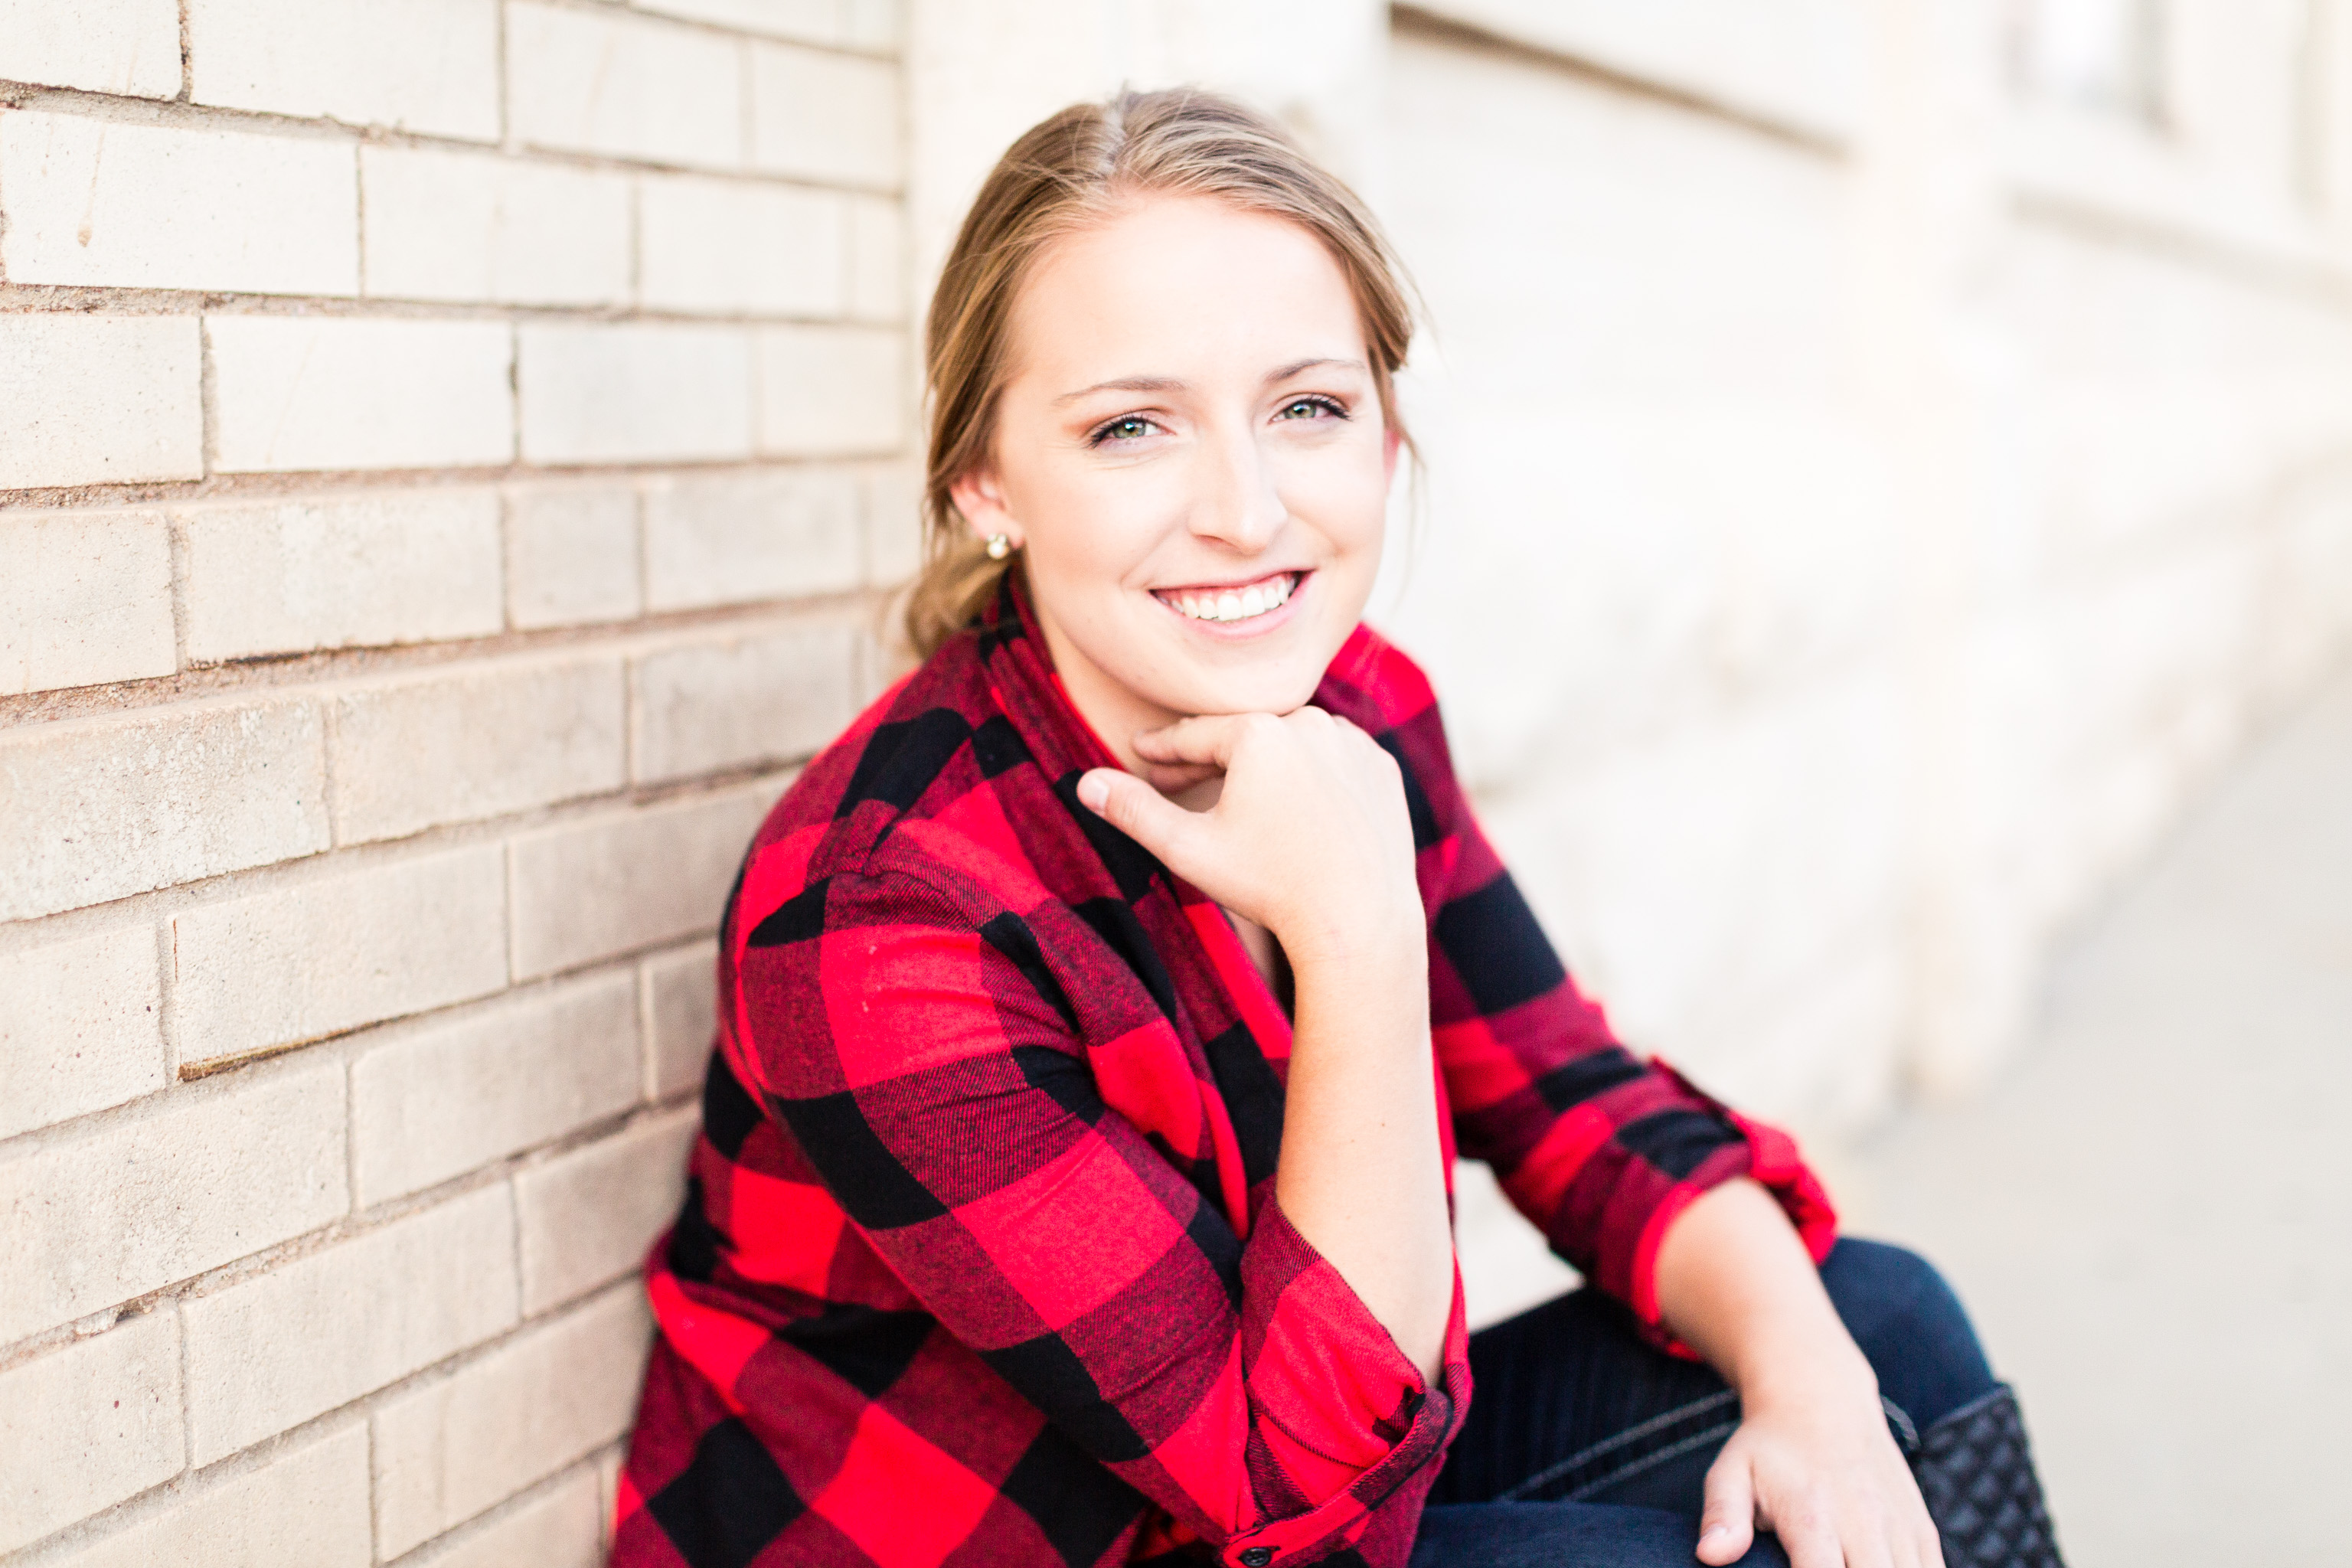 5 tips for having an Awesome Senior Portrait Session